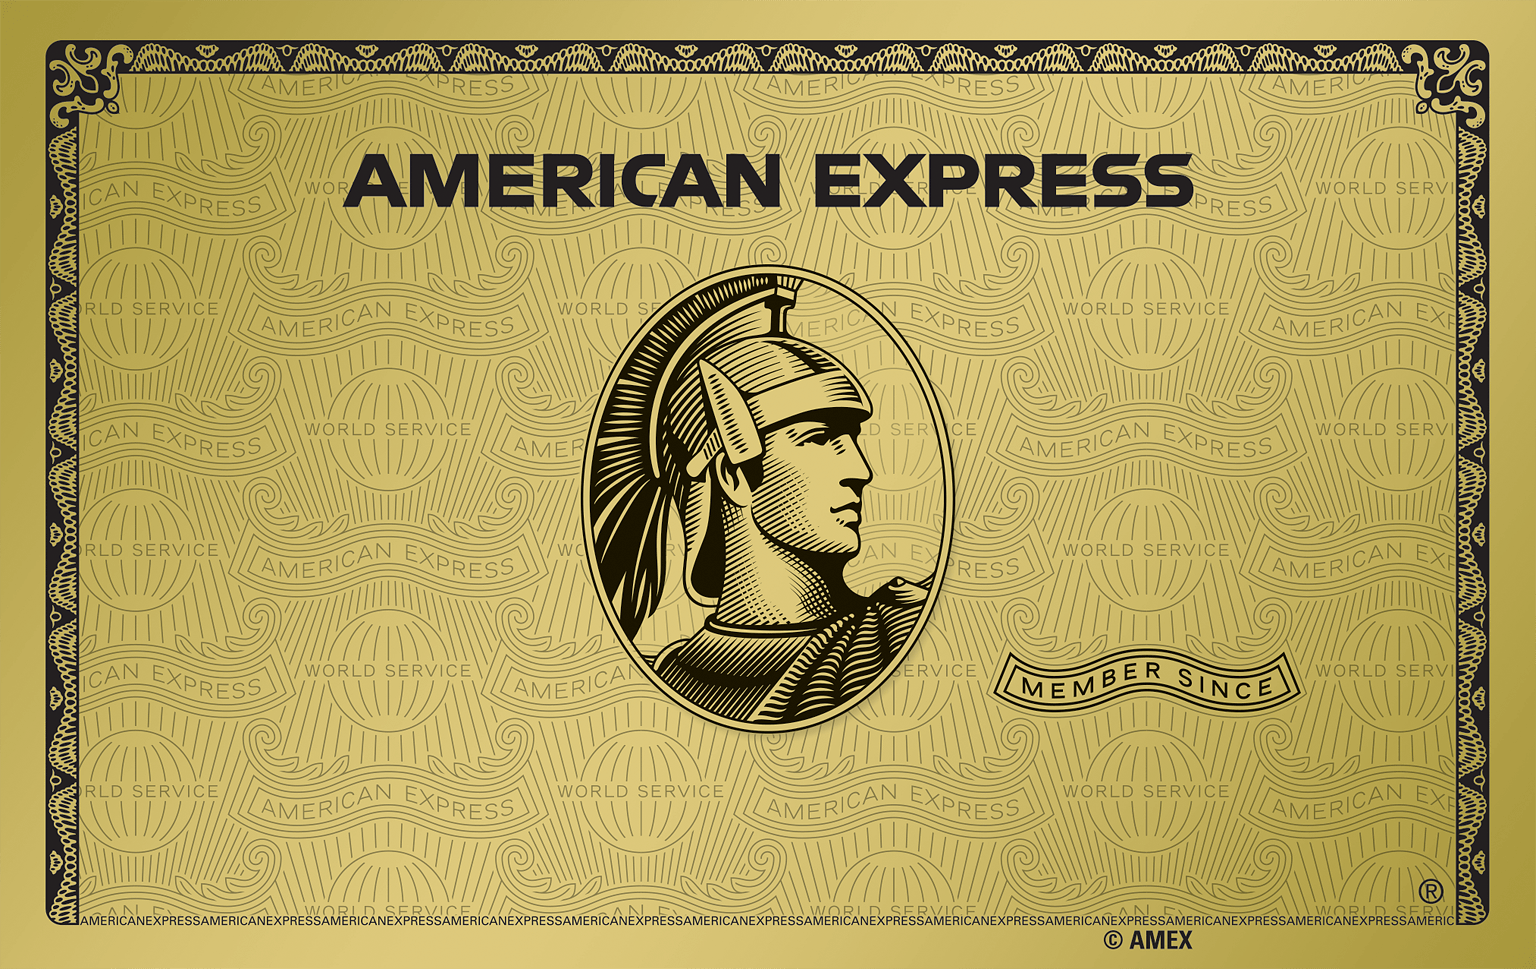 The American Express Gold Card